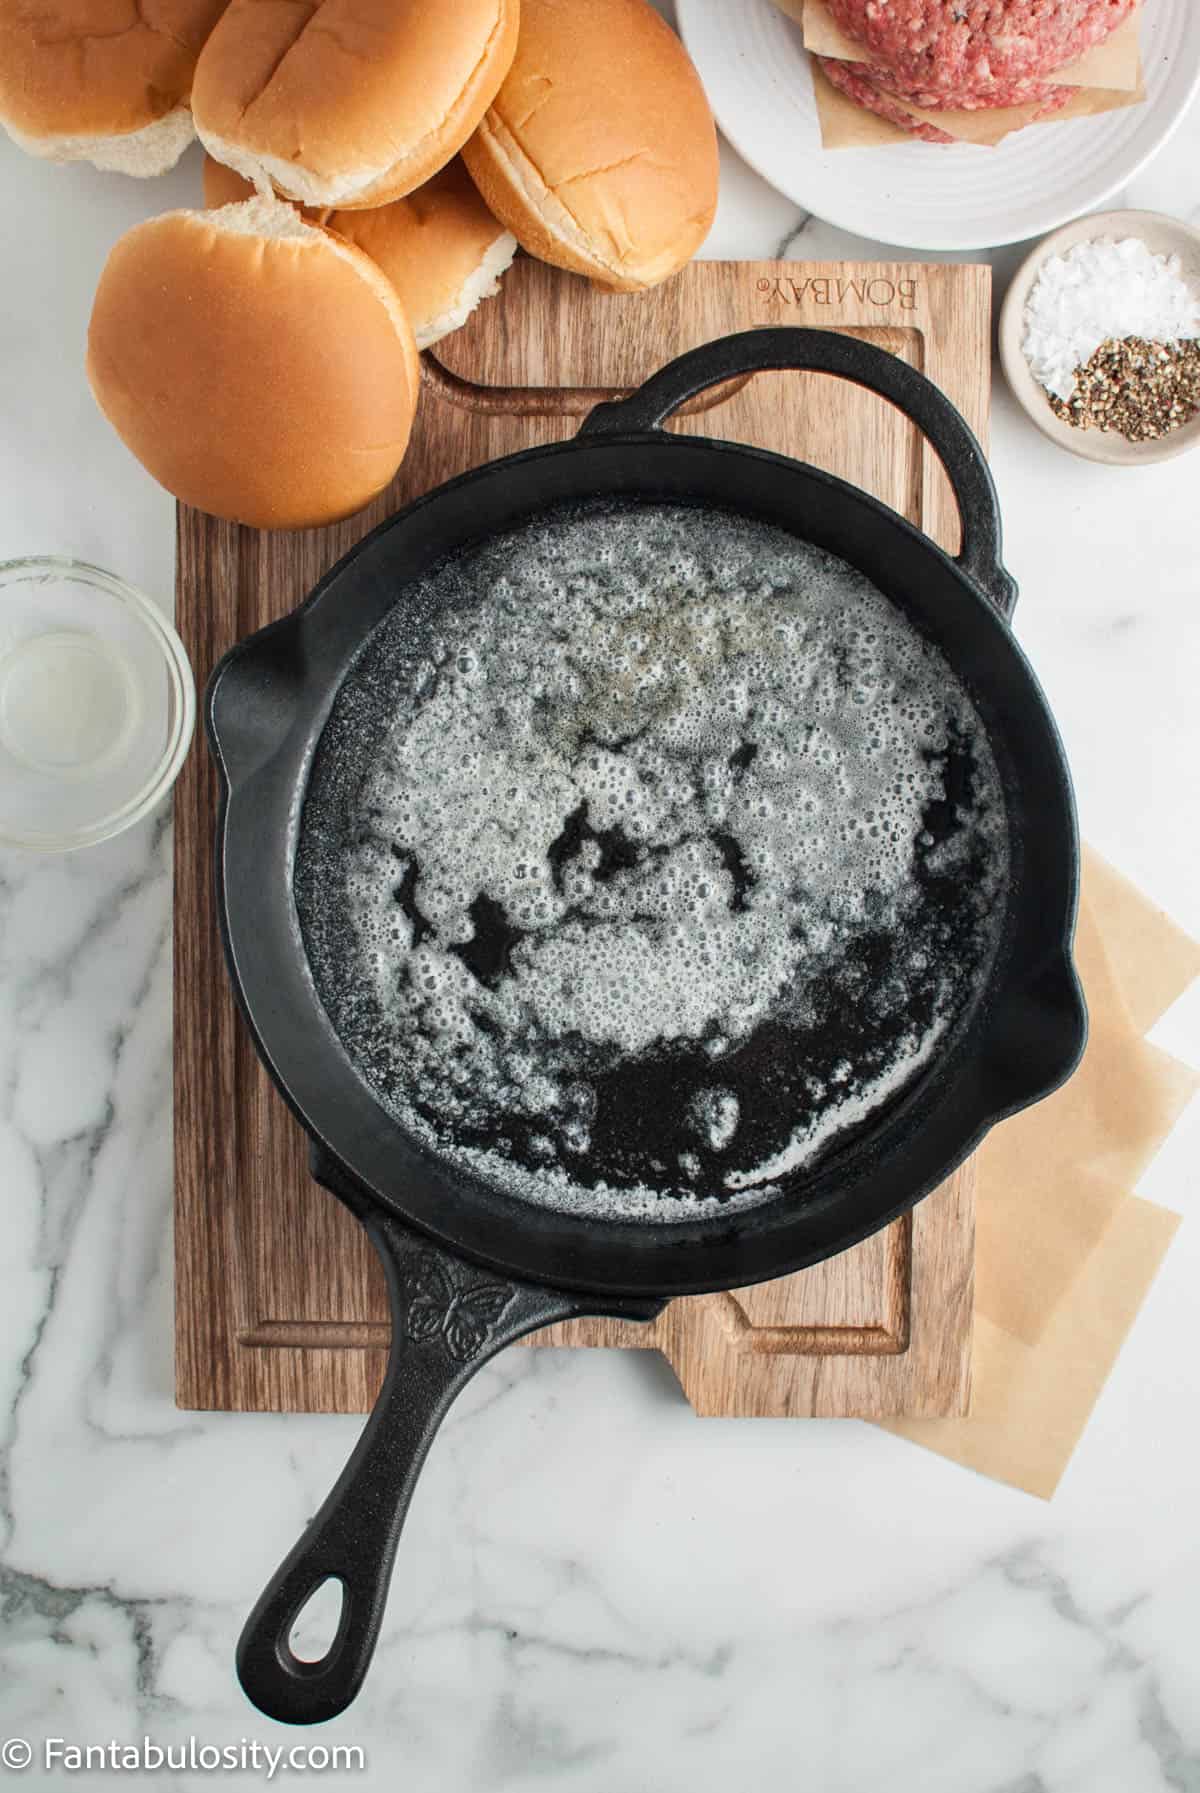 A skillet with melted butter bubbling inside of it.